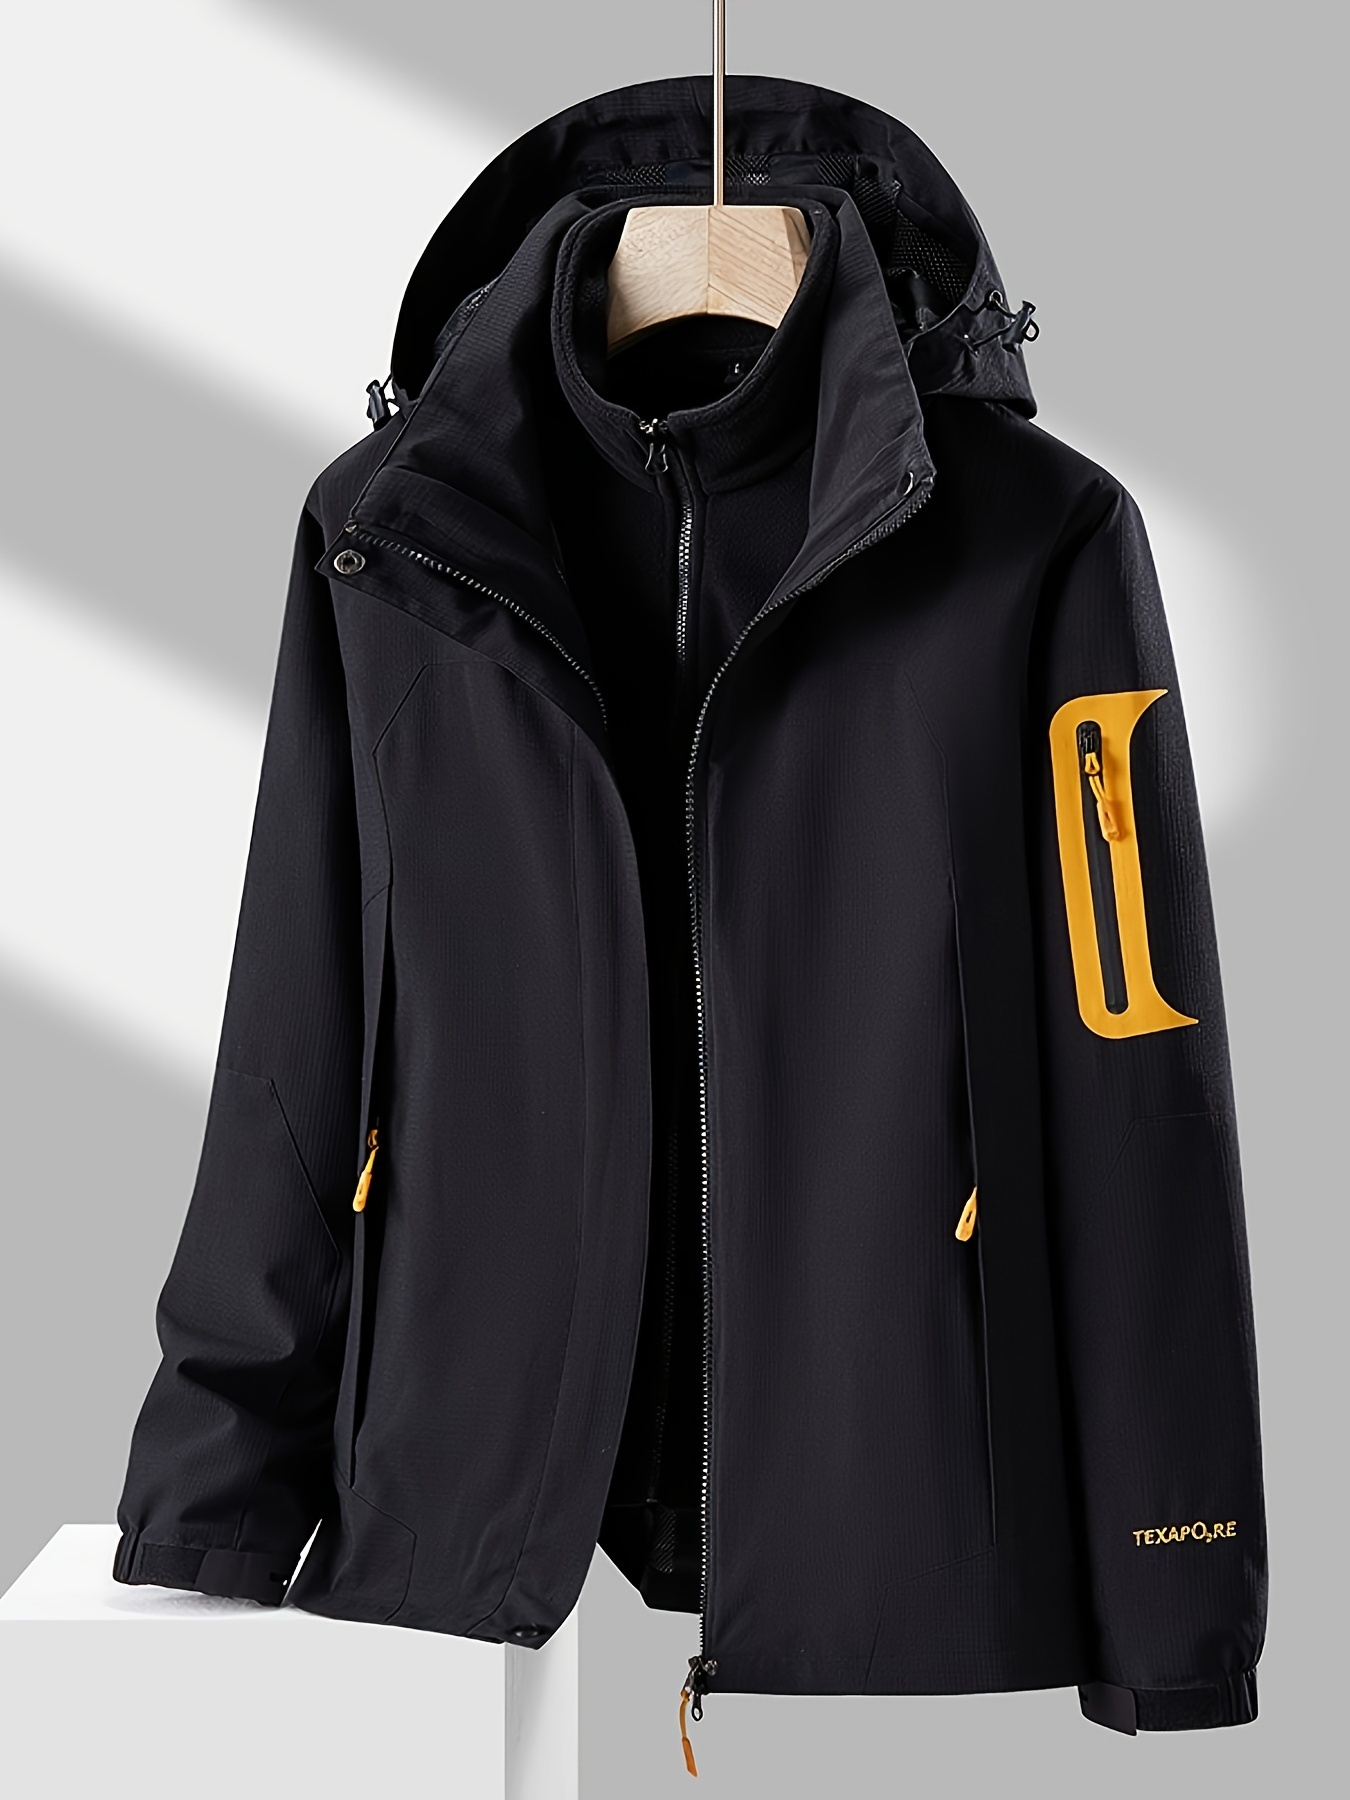 mens detachable hooded thick jacket outdoor casual windproof warm jacket for autumn and winter